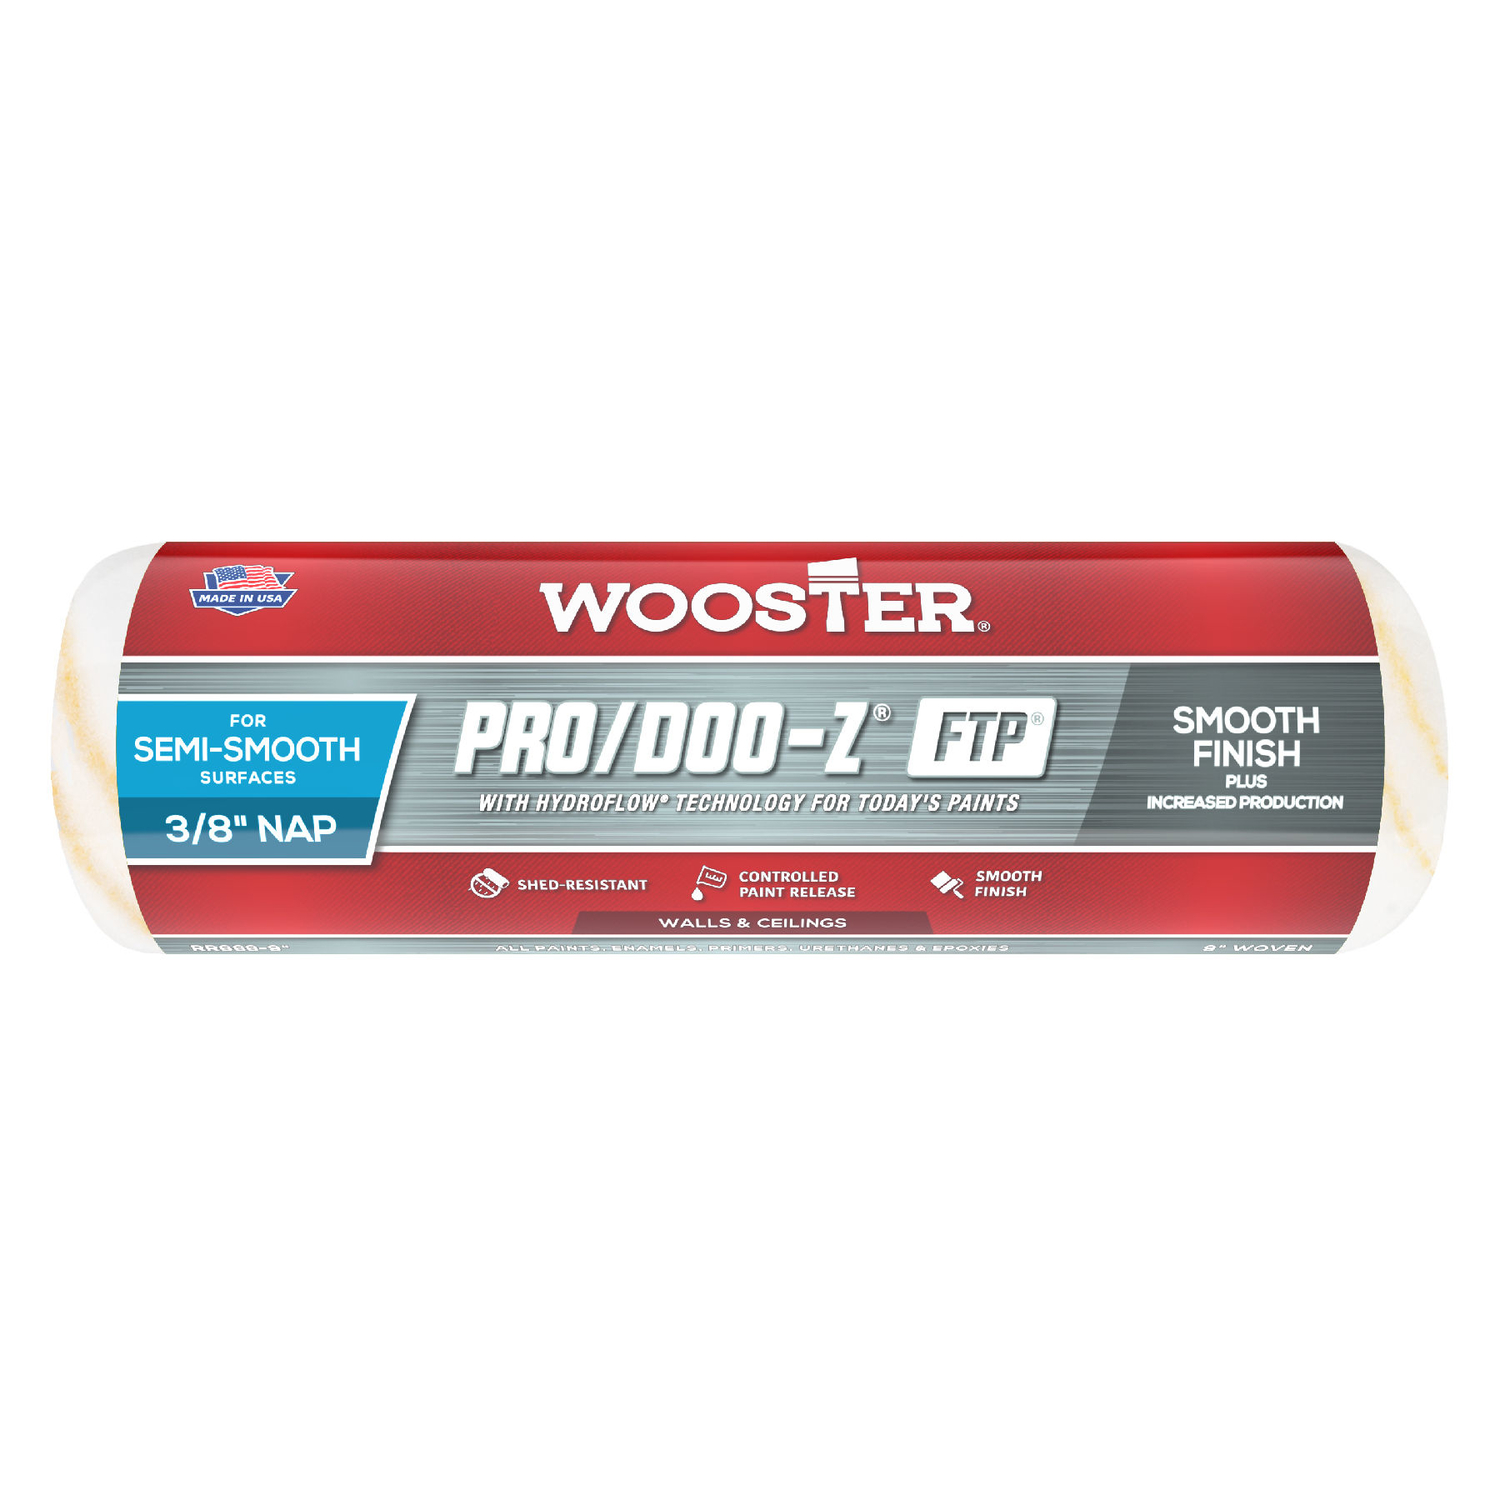 Photos - Putty Knife / Painting Tool Wooster Pro/Doo-Z FTP Synthetic Blend 9 in. W X 3/8 in. Paint Roller Cover